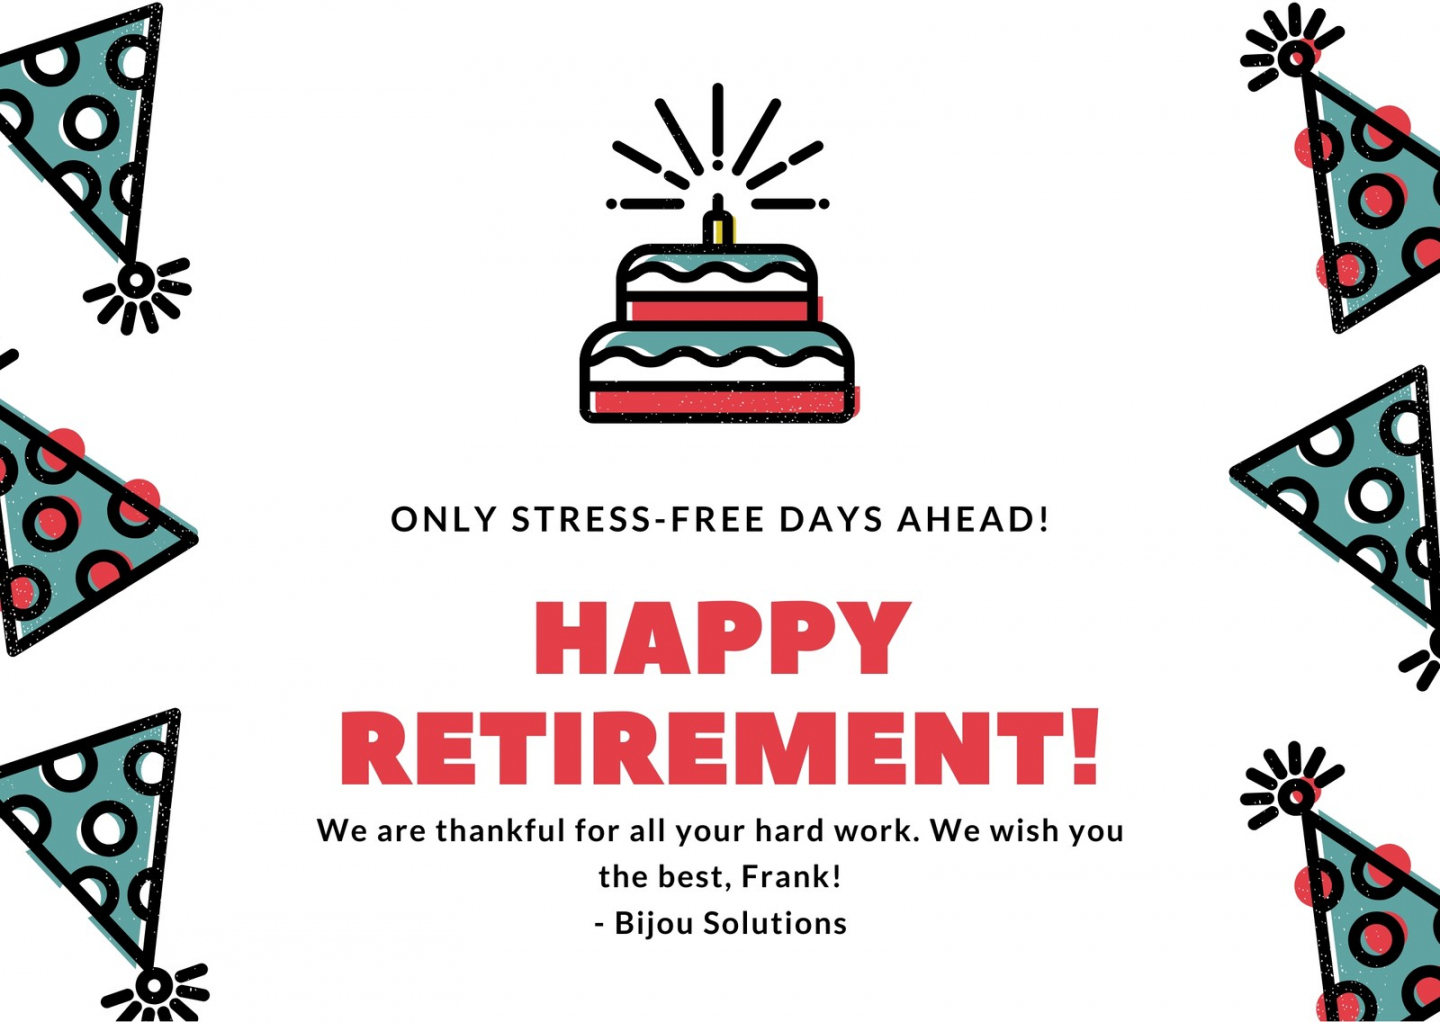 Free printable, customizable retirement card templates  Canva - FREE Printables - Free Printable Retirement Cards